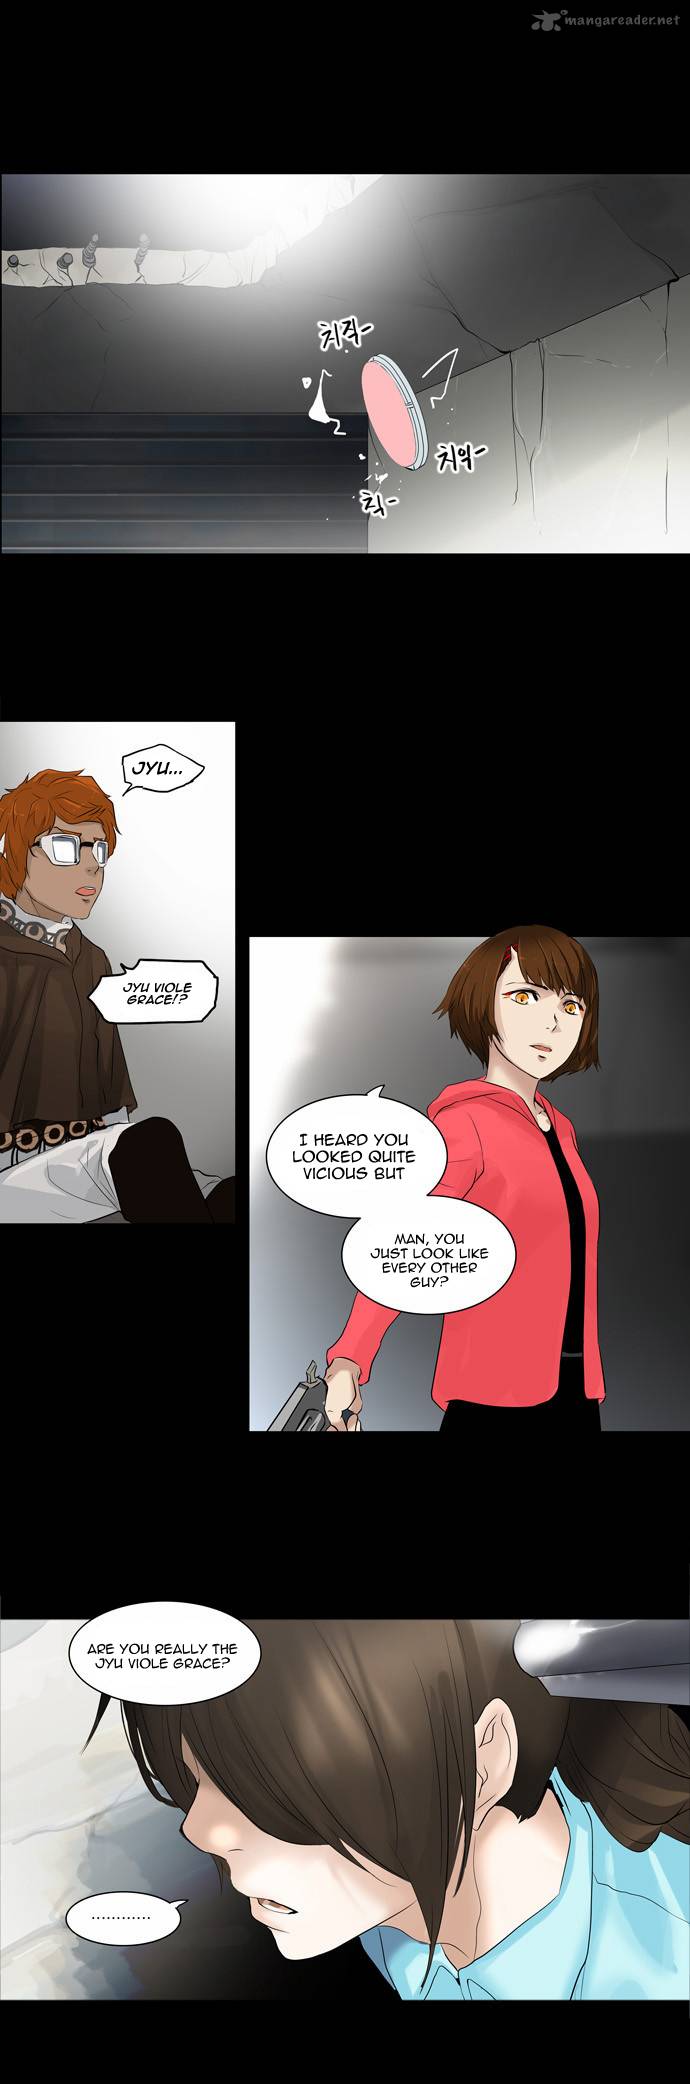 Tower Of God 140 1